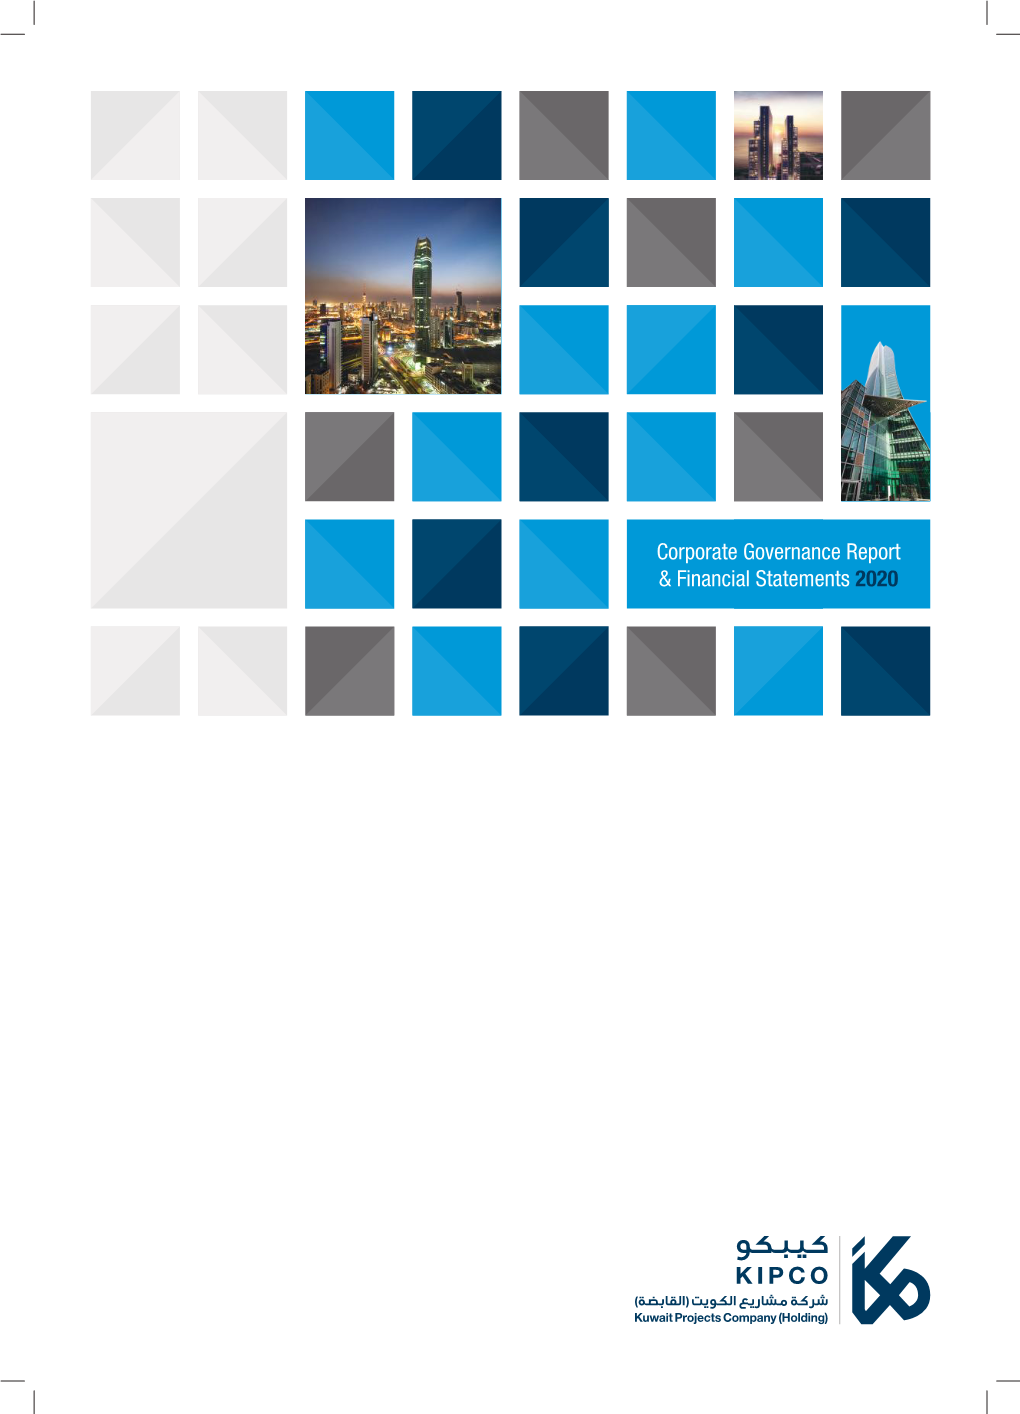 Corporate Governance Report & Financial Statements 2020